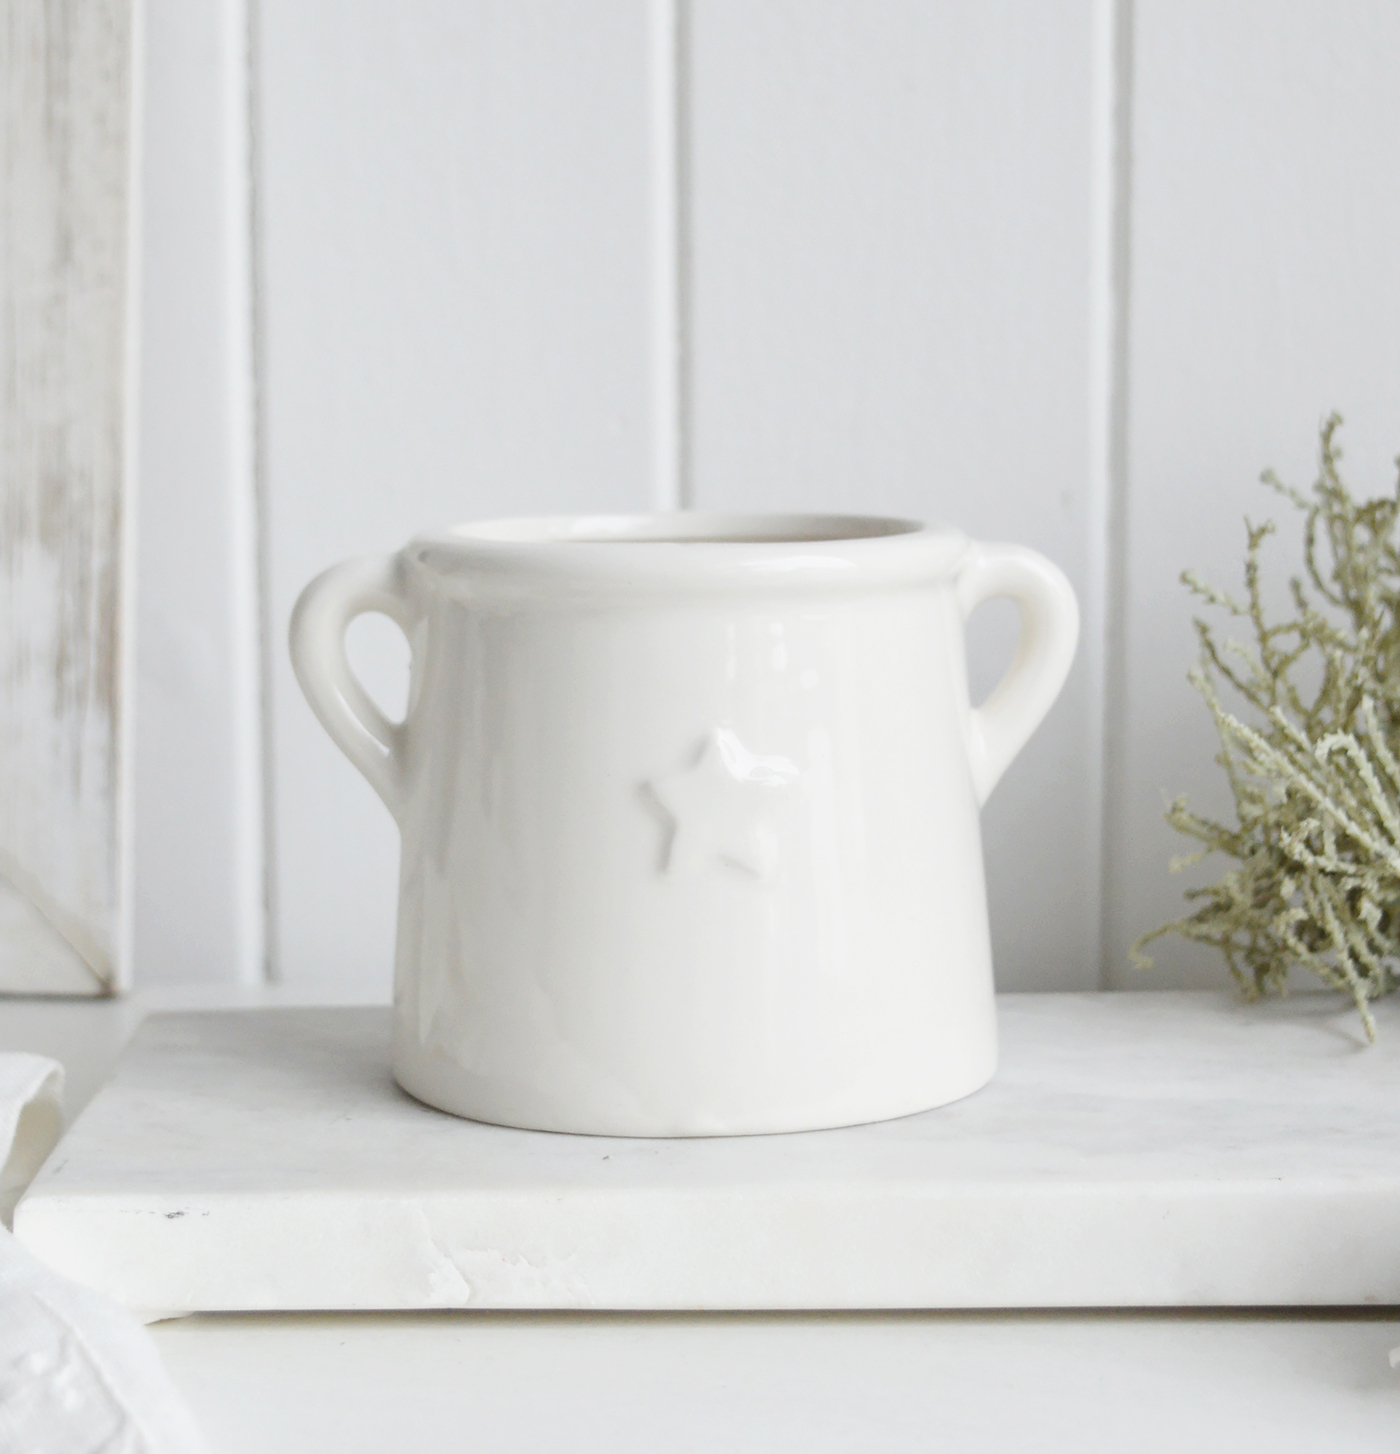 White ceramic star rangefor New England styling and white interiors. A small plate, candle holder and pot for Coastal, modern farmhouse furniture and home decor